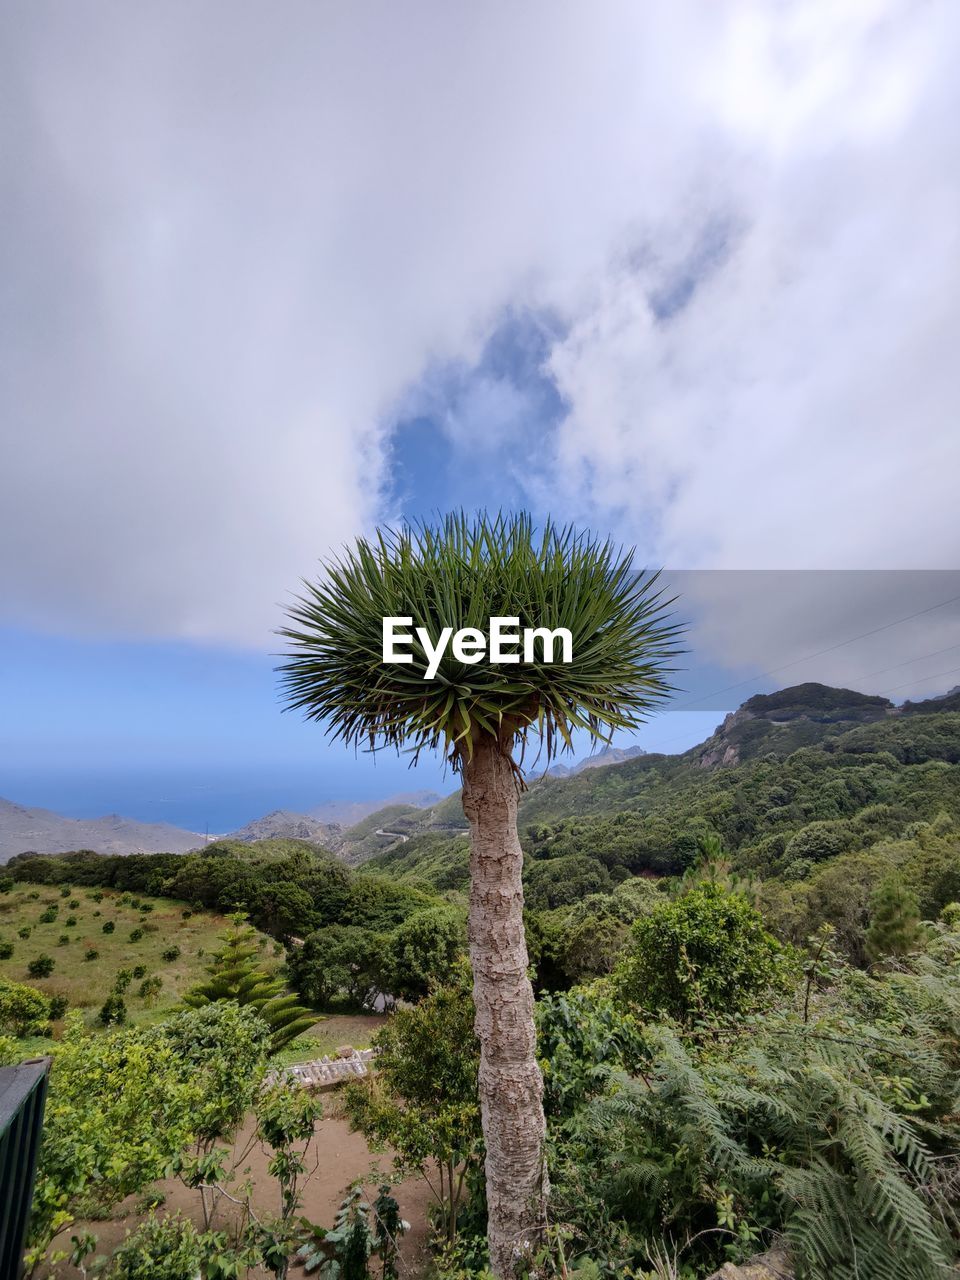 plant, sky, nature, tree, cloud, environment, beauty in nature, scenics - nature, landscape, palm tree, no people, mountain, land, tranquility, tropical climate, flower, non-urban scene, travel destinations, growth, outdoors, green, tranquil scene, day, travel, grass, vegetation, tourism, desert, dramatic sky, idyllic, semi-arid